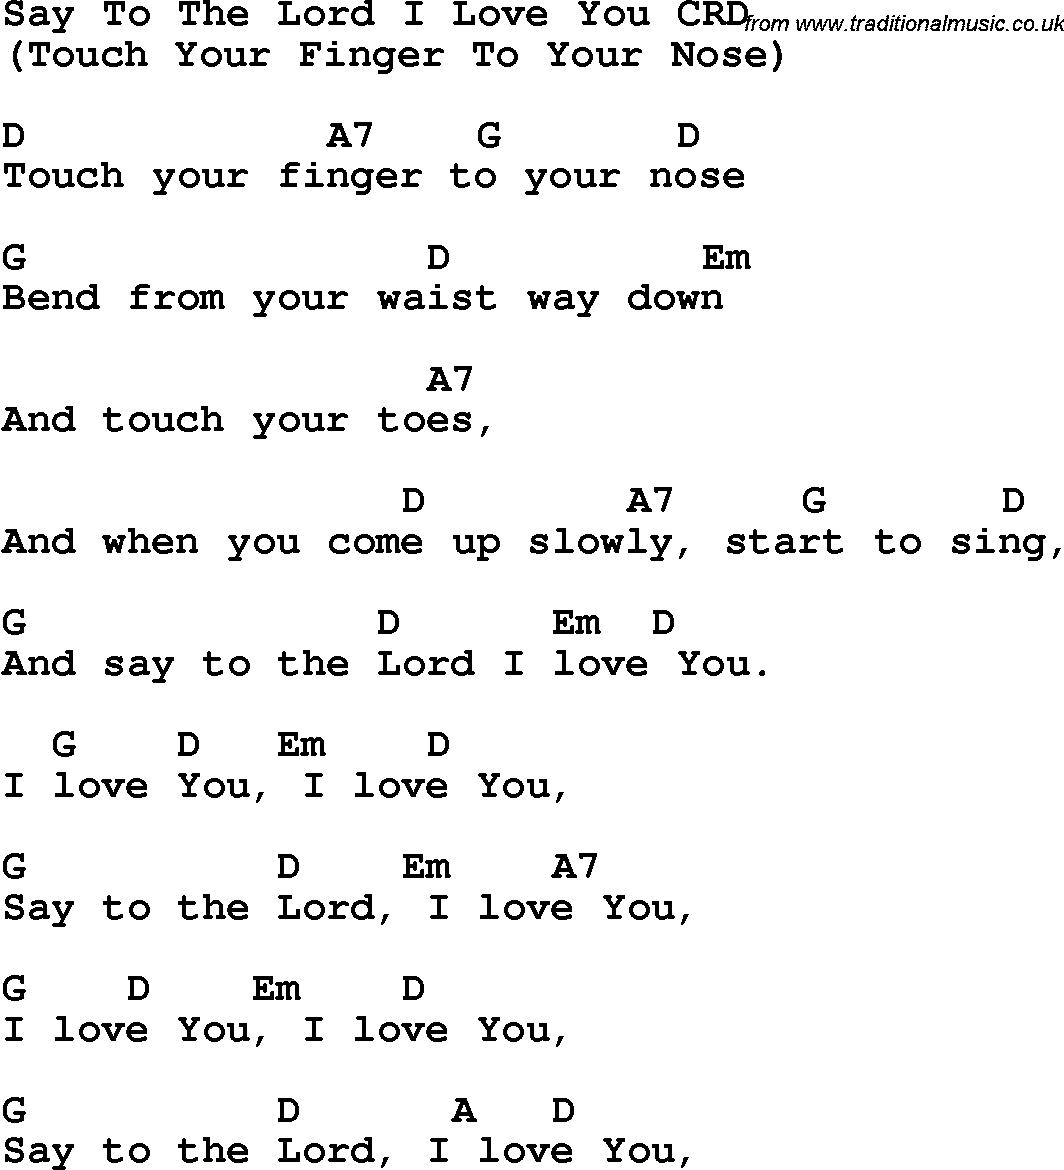 Christian Chlidrens Song Say To The Lord I Love You CRD Lyrics & Chords